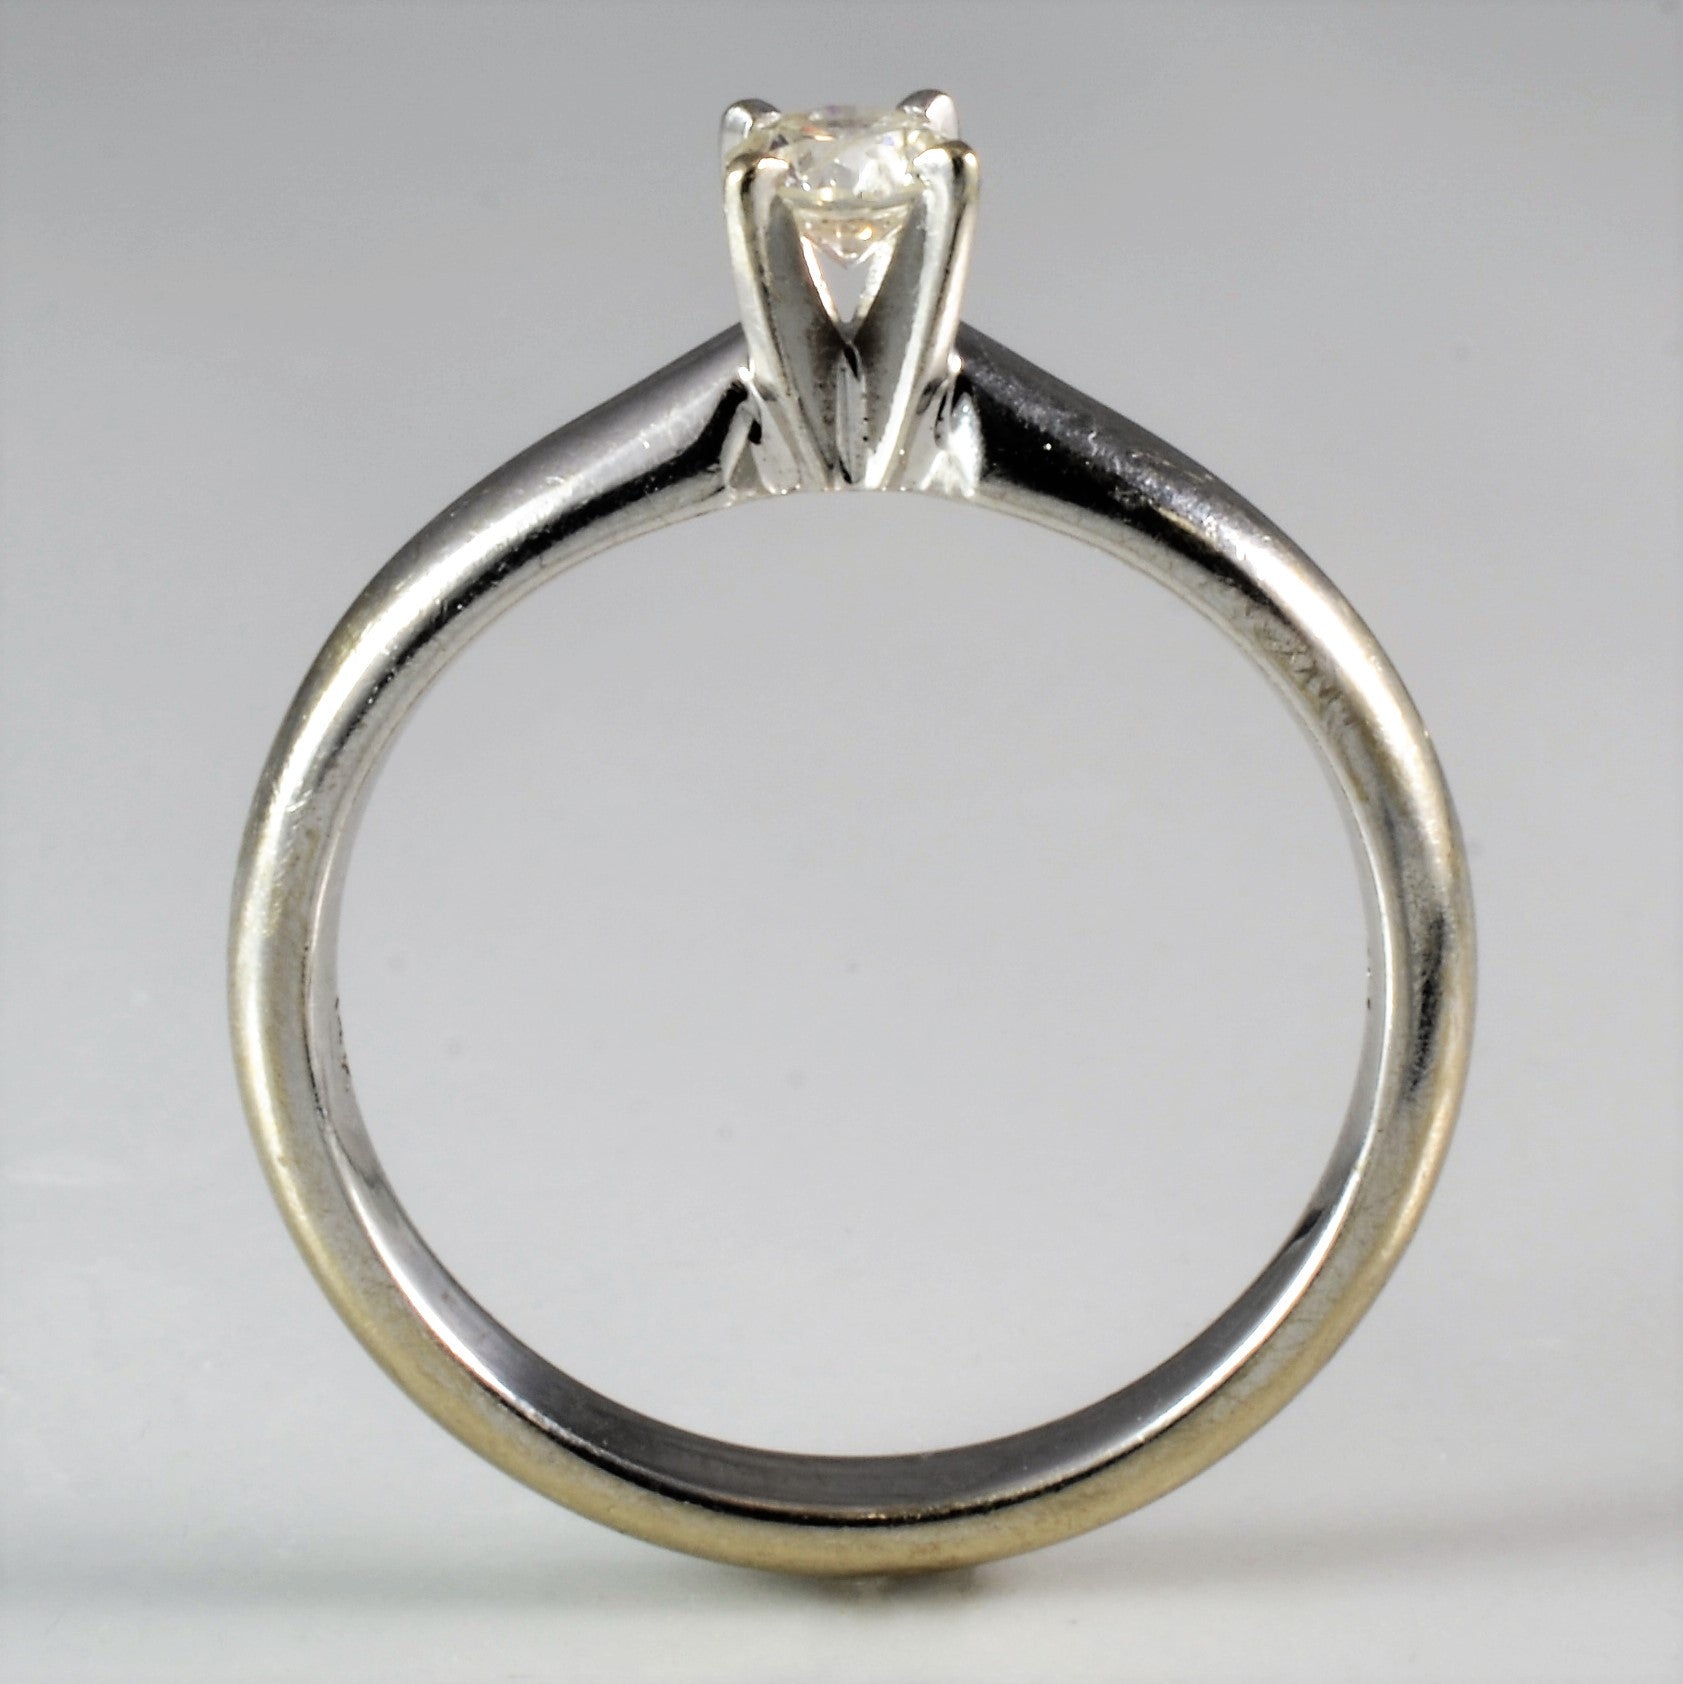 Simple White Gold Solitaire Ring | 0.20 ct, SZ 6.25 |